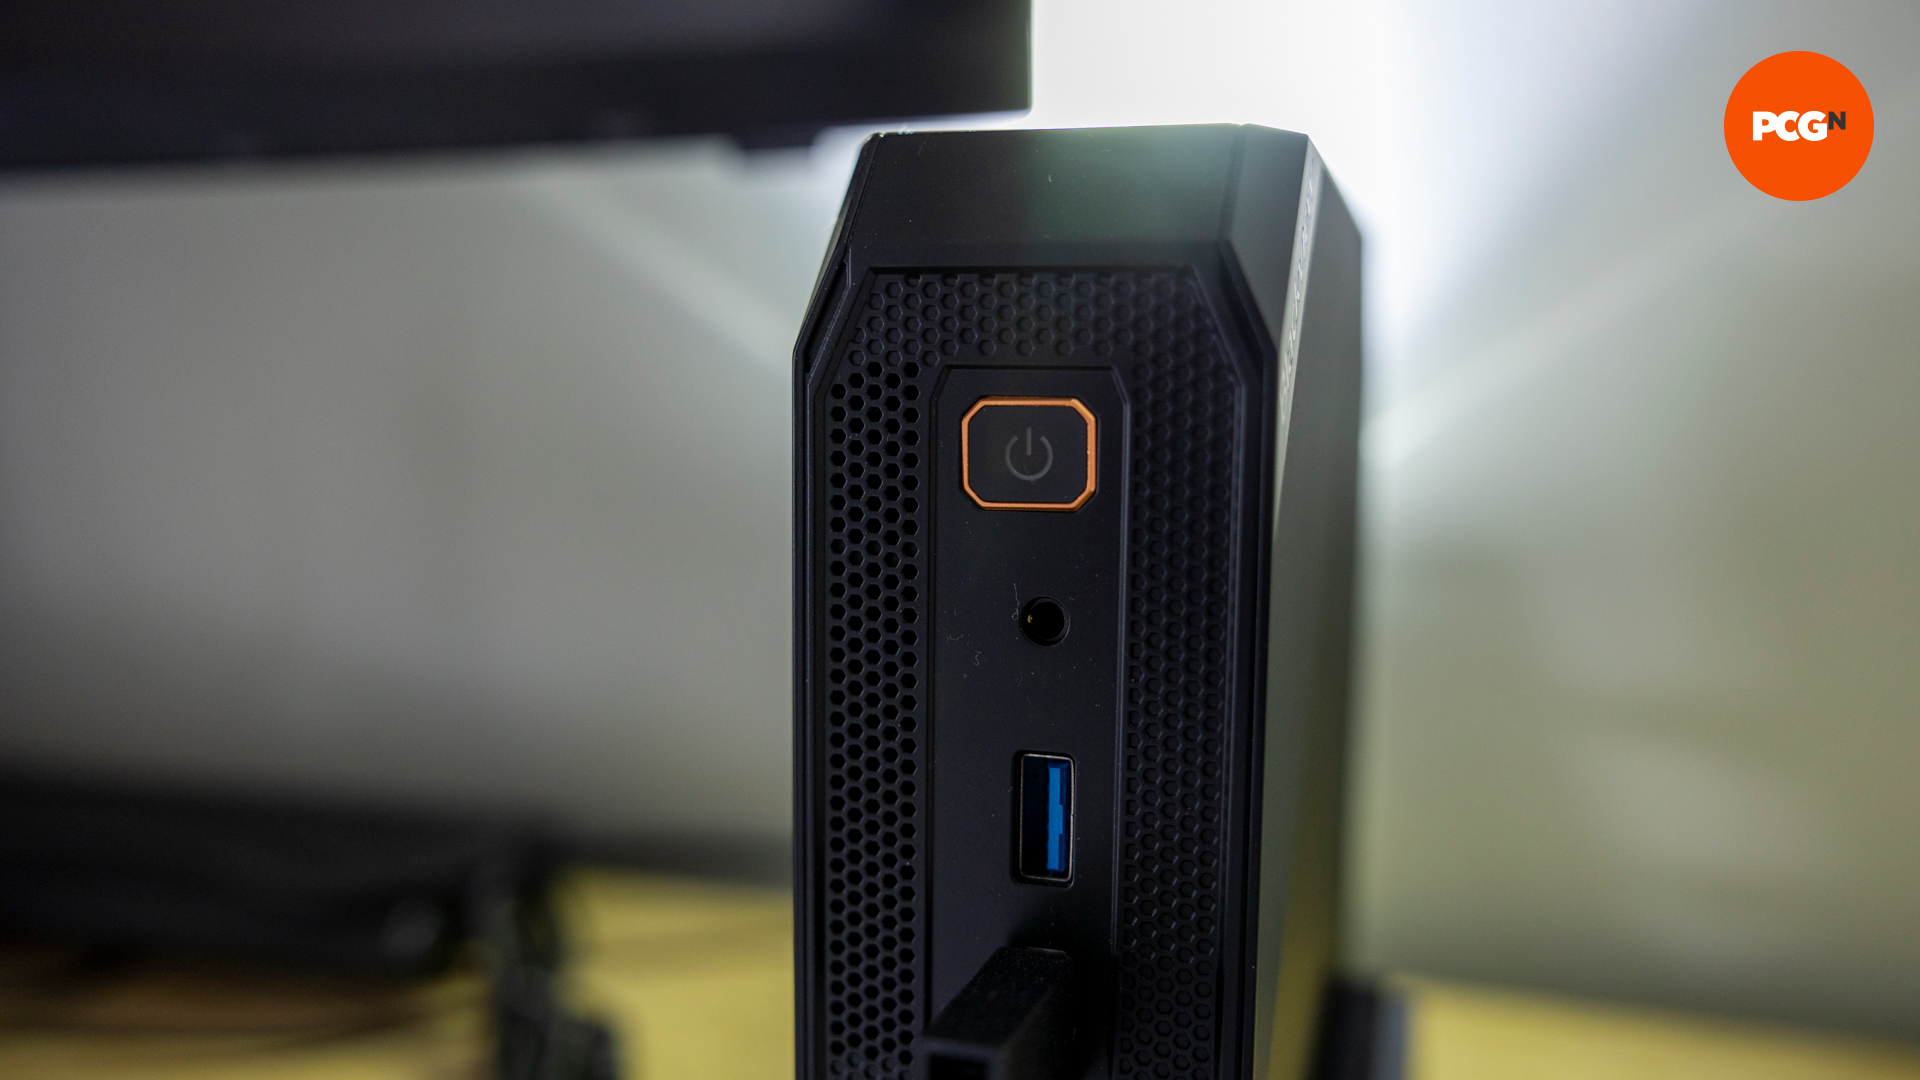 The power button on the Blackview MP200 mini gaming PC